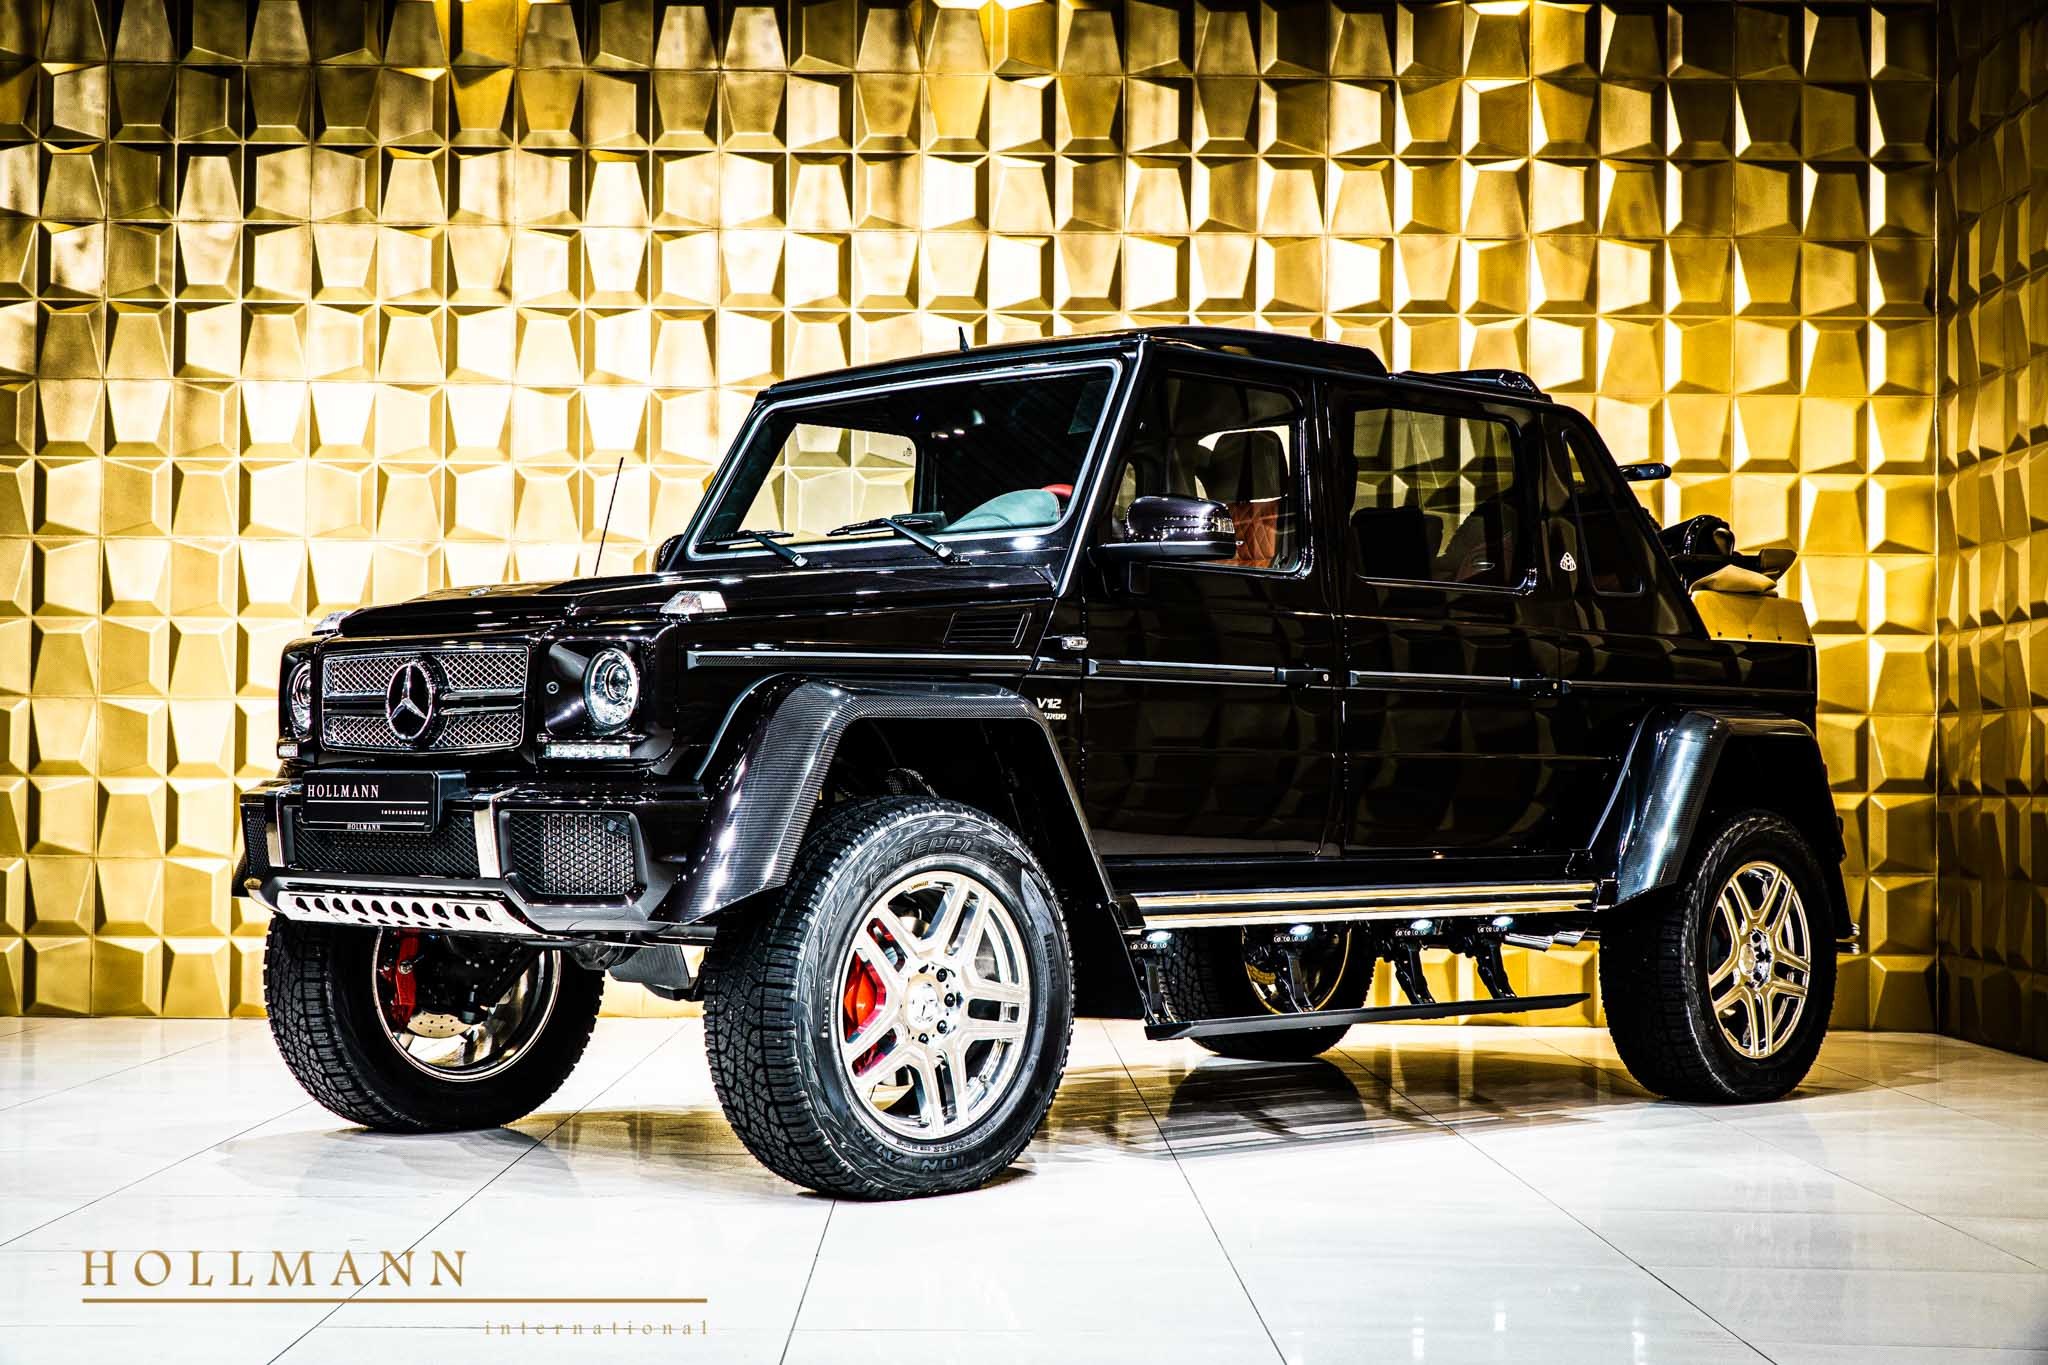 bao the rock surprised the world when he gave his junior drake a super rare mercedes maybach g landaulet to celebrate his junior s th birthday 65381b3f8e8c0 The Rock Surprised The World When He Gave His Junior Drake A Super Rare Mercedes-maybach G650 Landaulet To Celebrate His Junior's 37th Birthday.